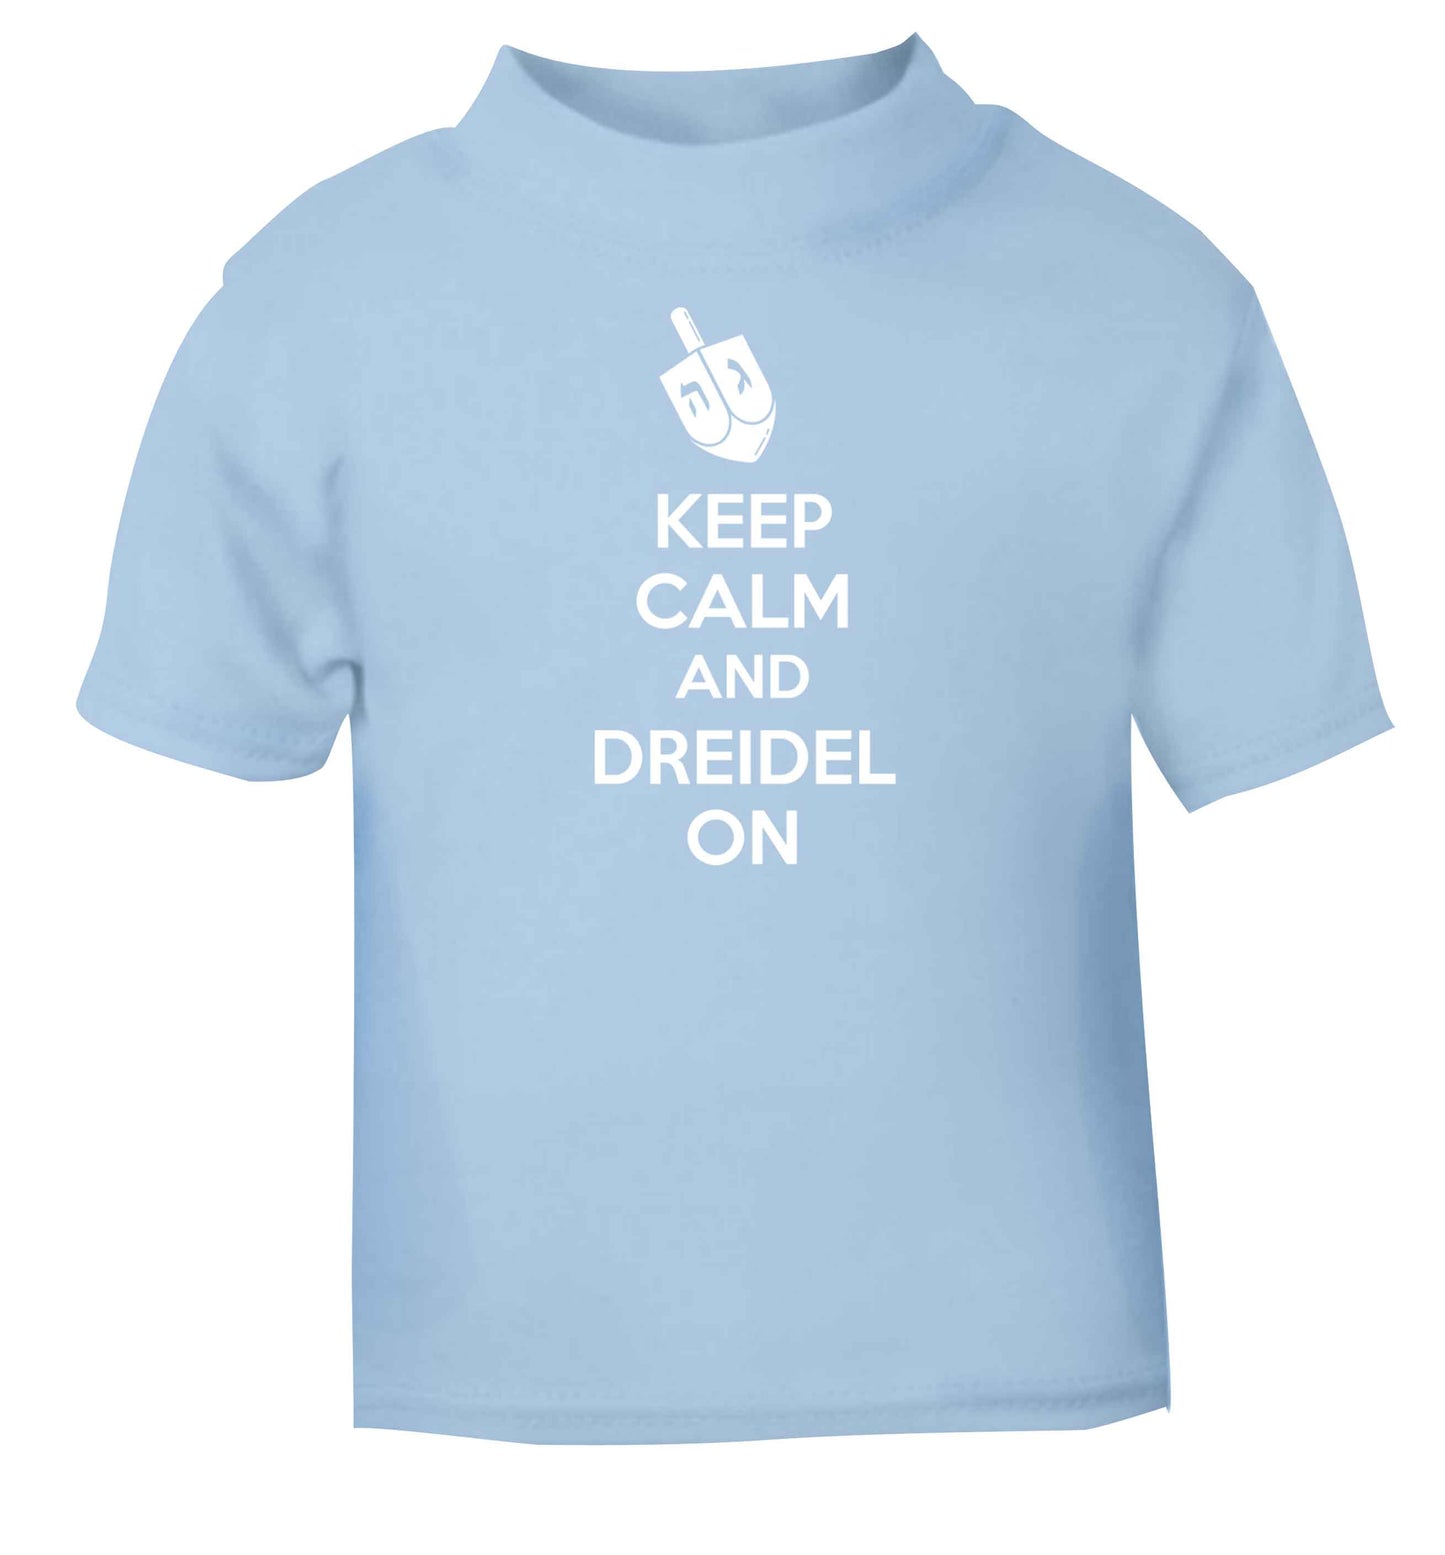 Keep calm and dreidel on light blue baby toddler Tshirt 2 Years